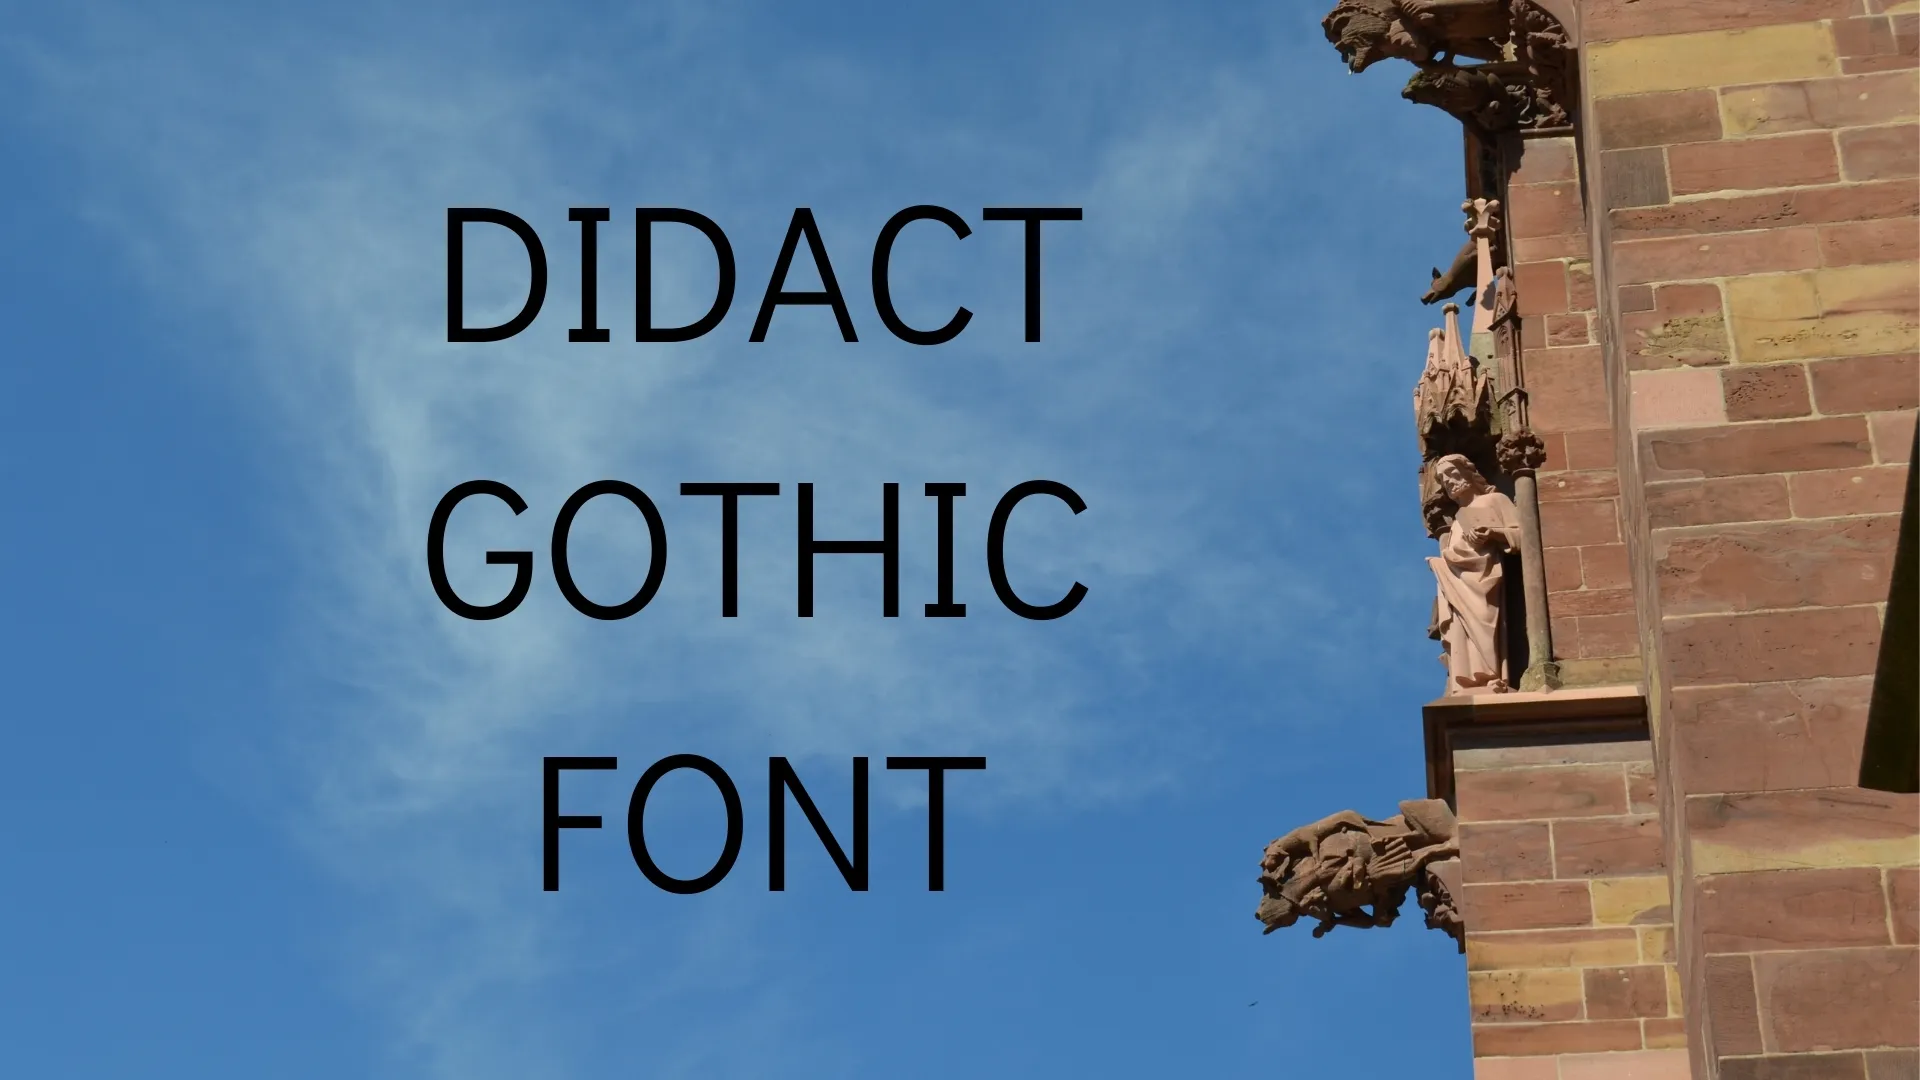 Didact Gothic Font